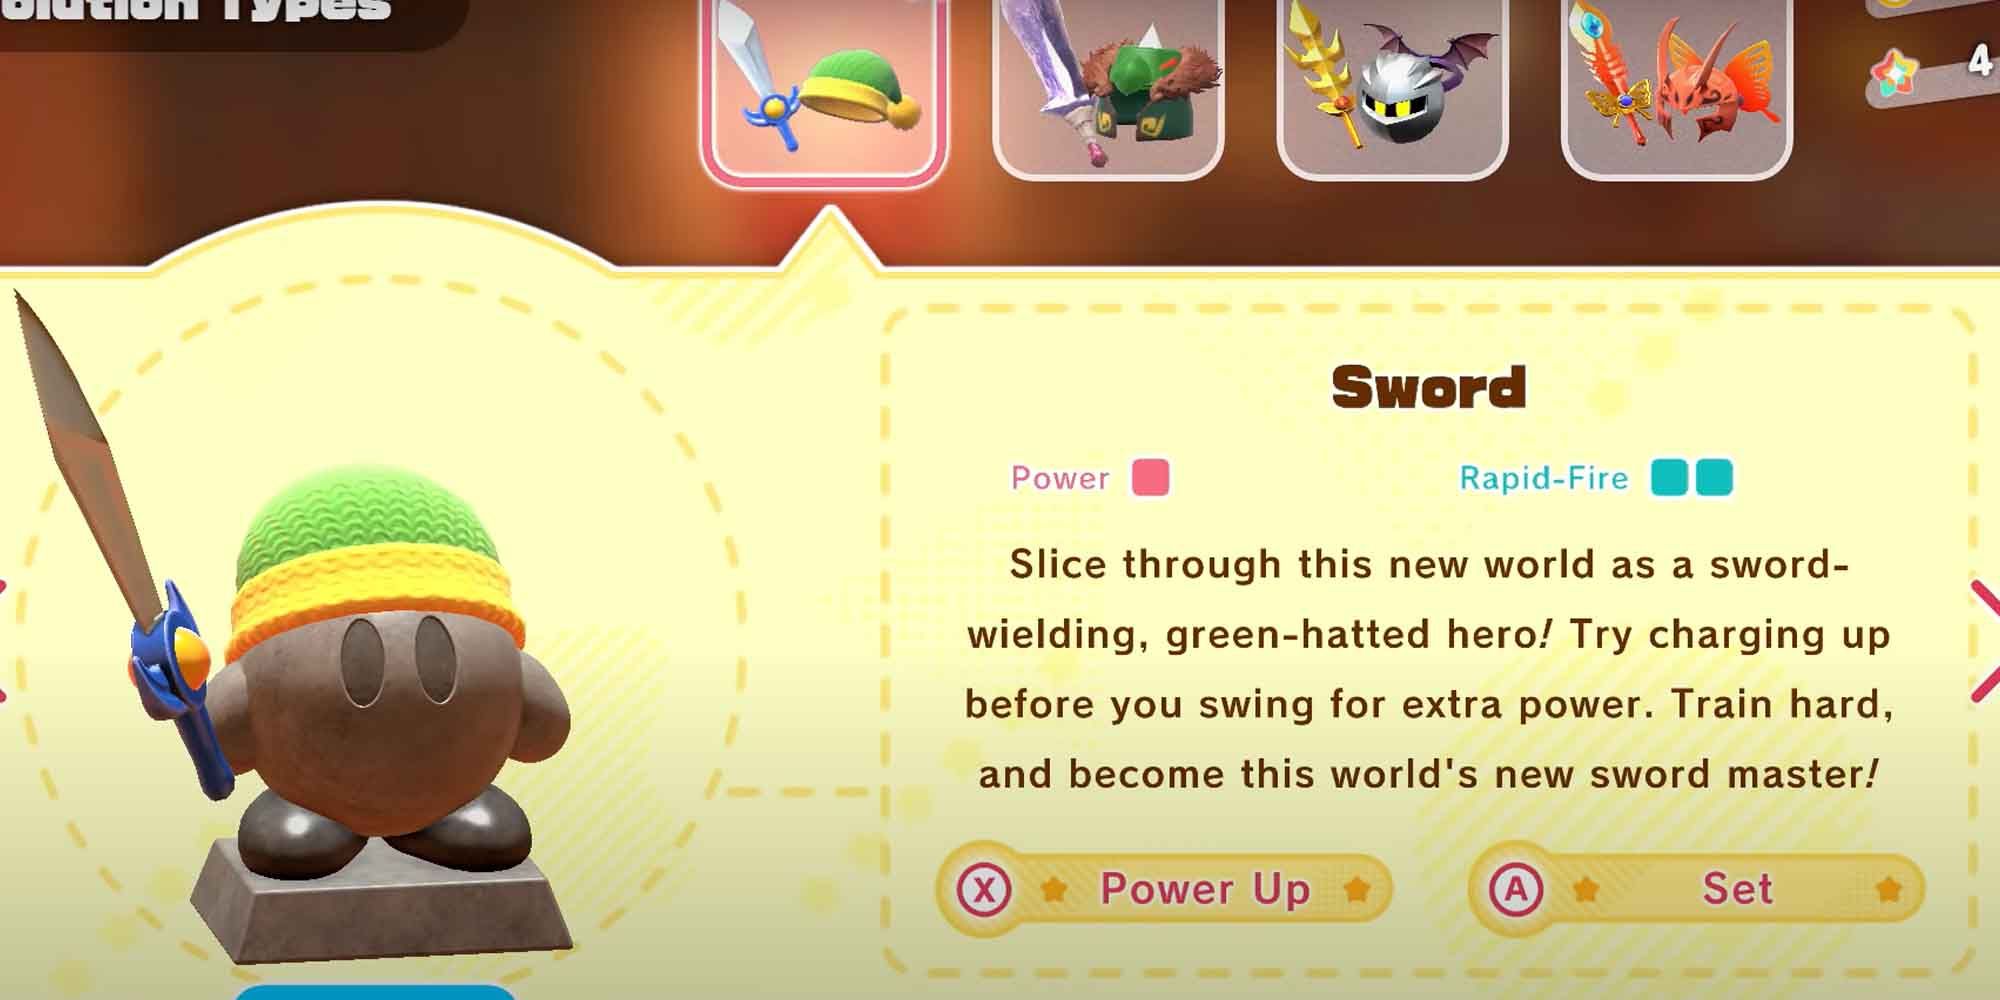 The Sword copy ability in Kirby in The Forgotten Land